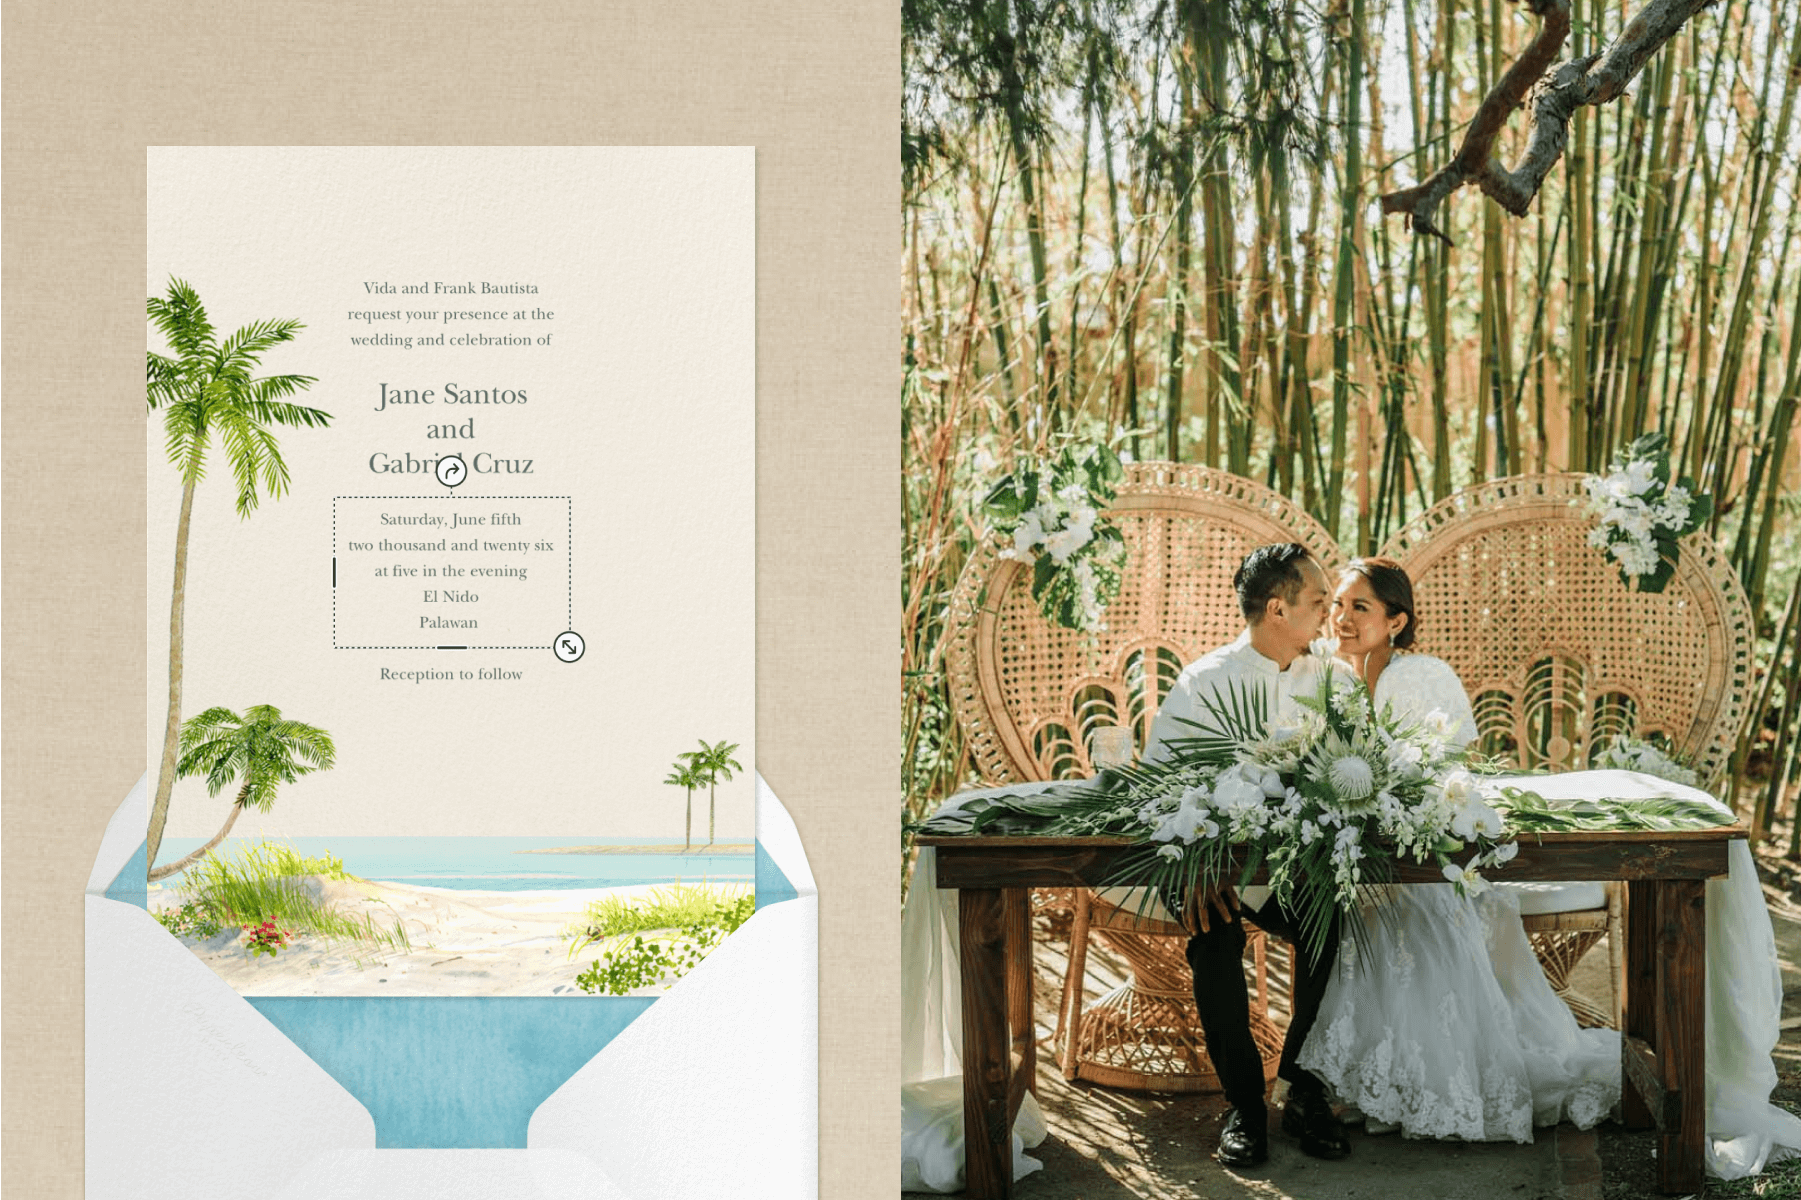 An invitation with palm trees on a beach; a newlywed couple in wedding attire sits at a sweetheart table in front of a bamboo forest.